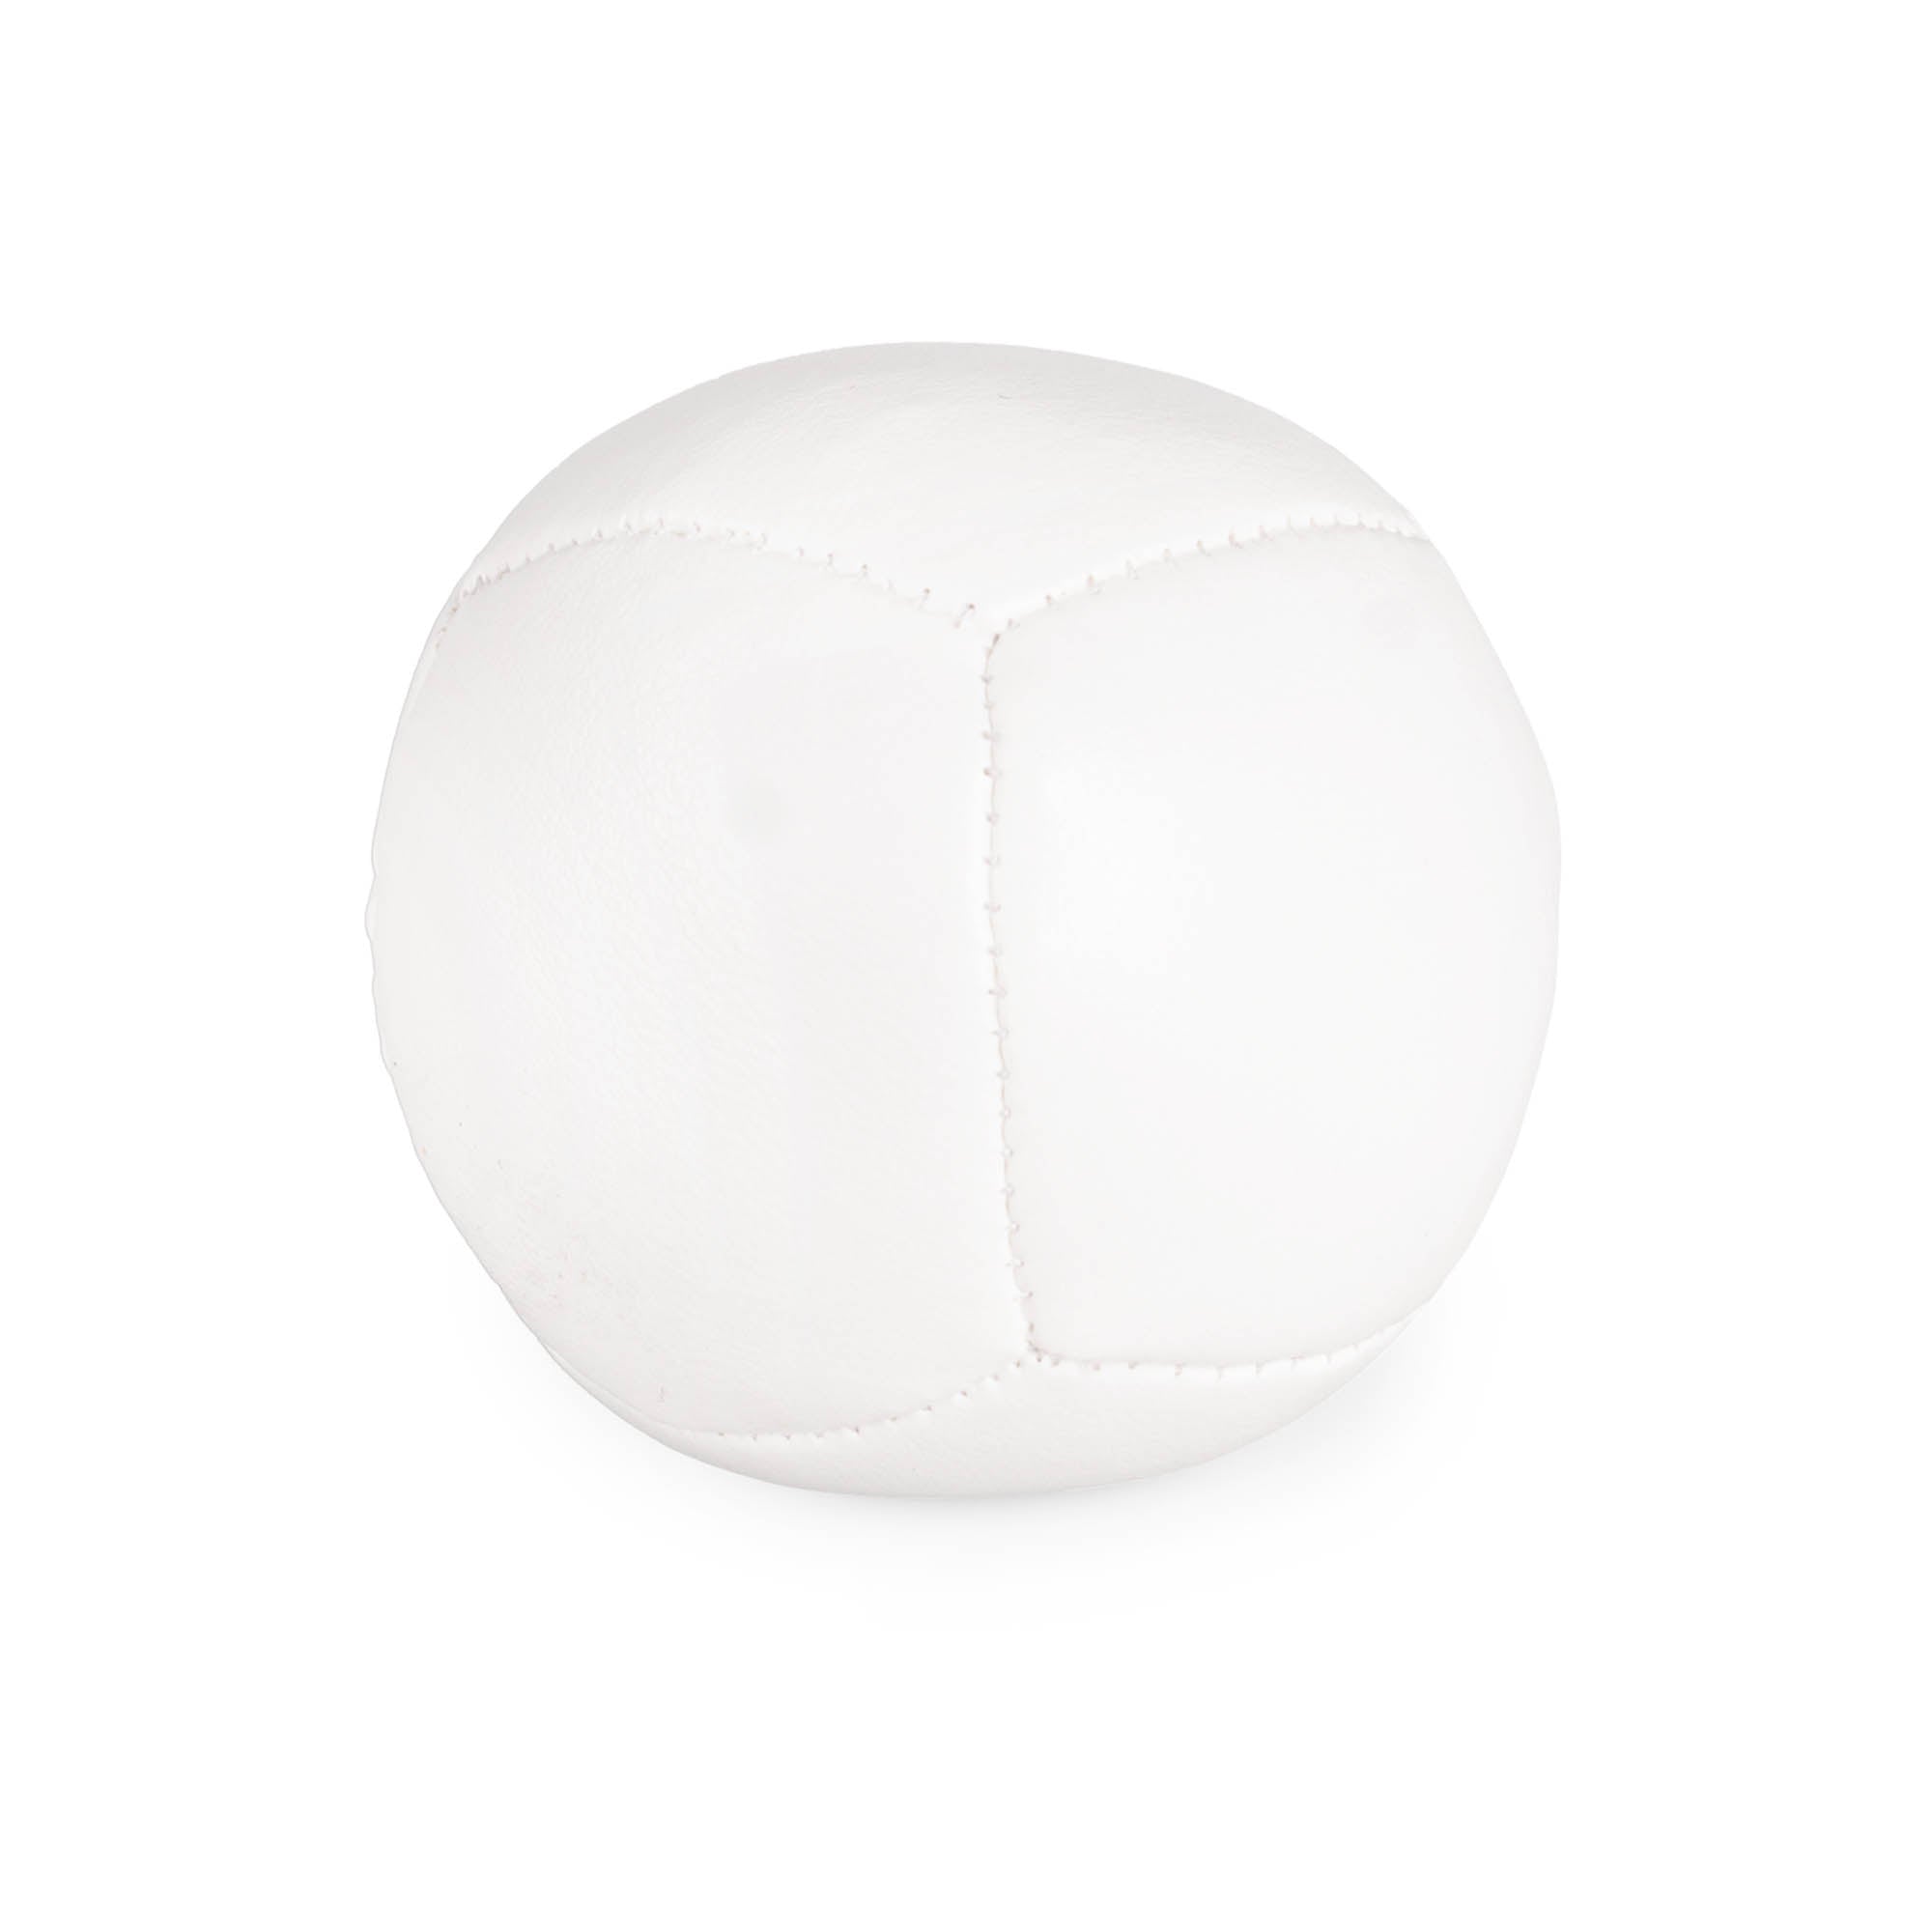 Firetoys white 110g thud juggling ball, straight on in a white background